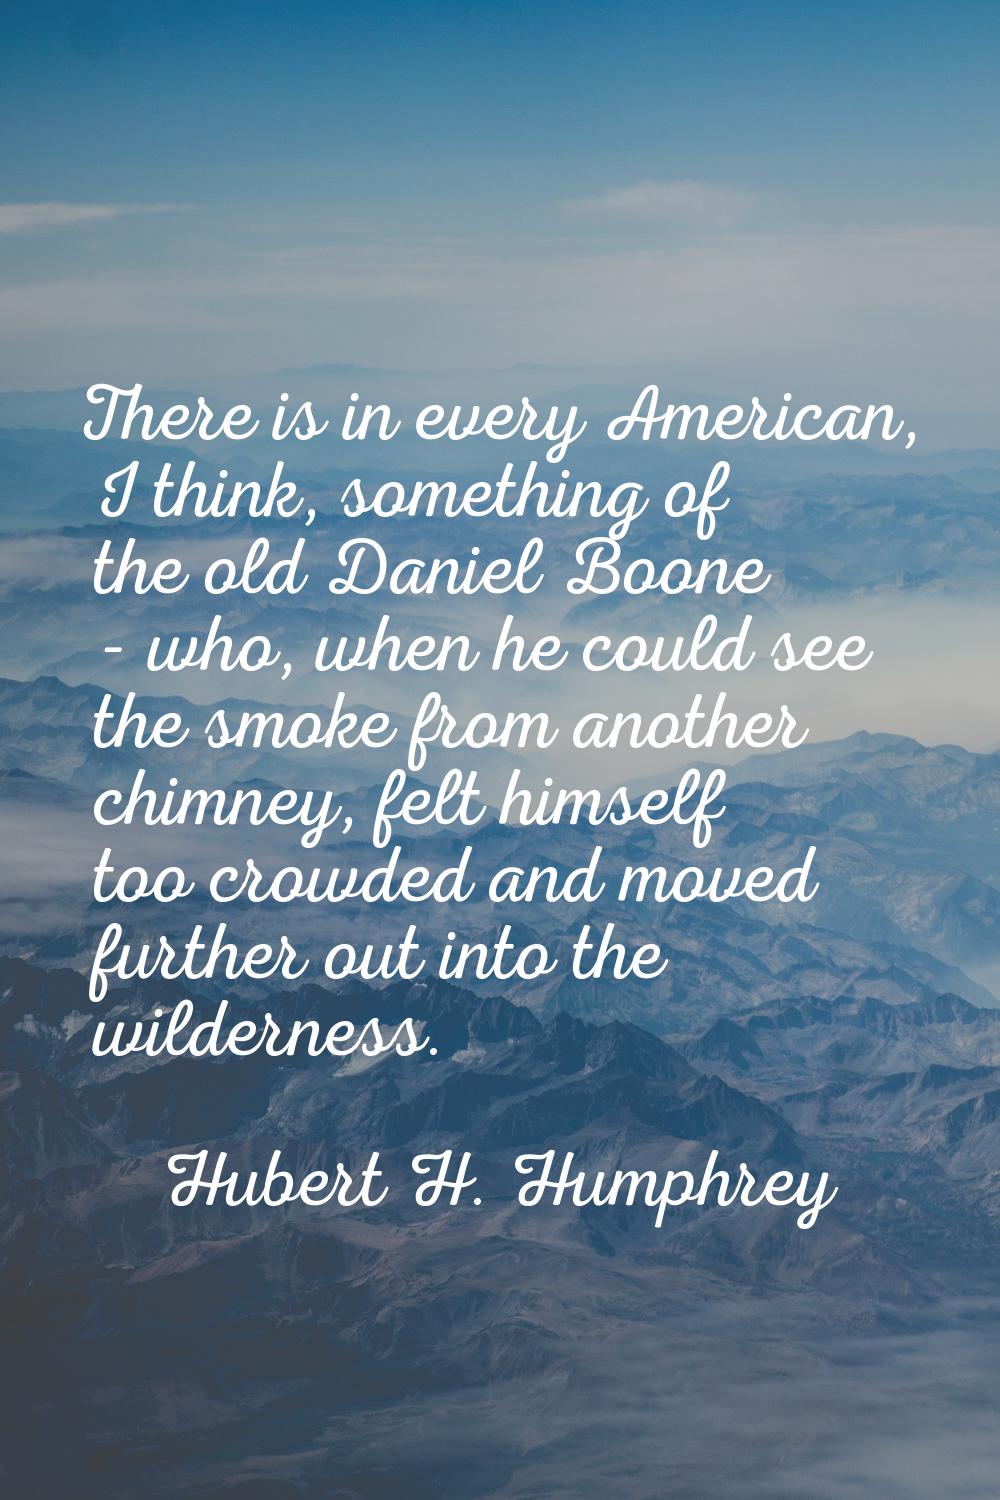 There is in every American, I think, something of the old Daniel Boone - who, when he could see the